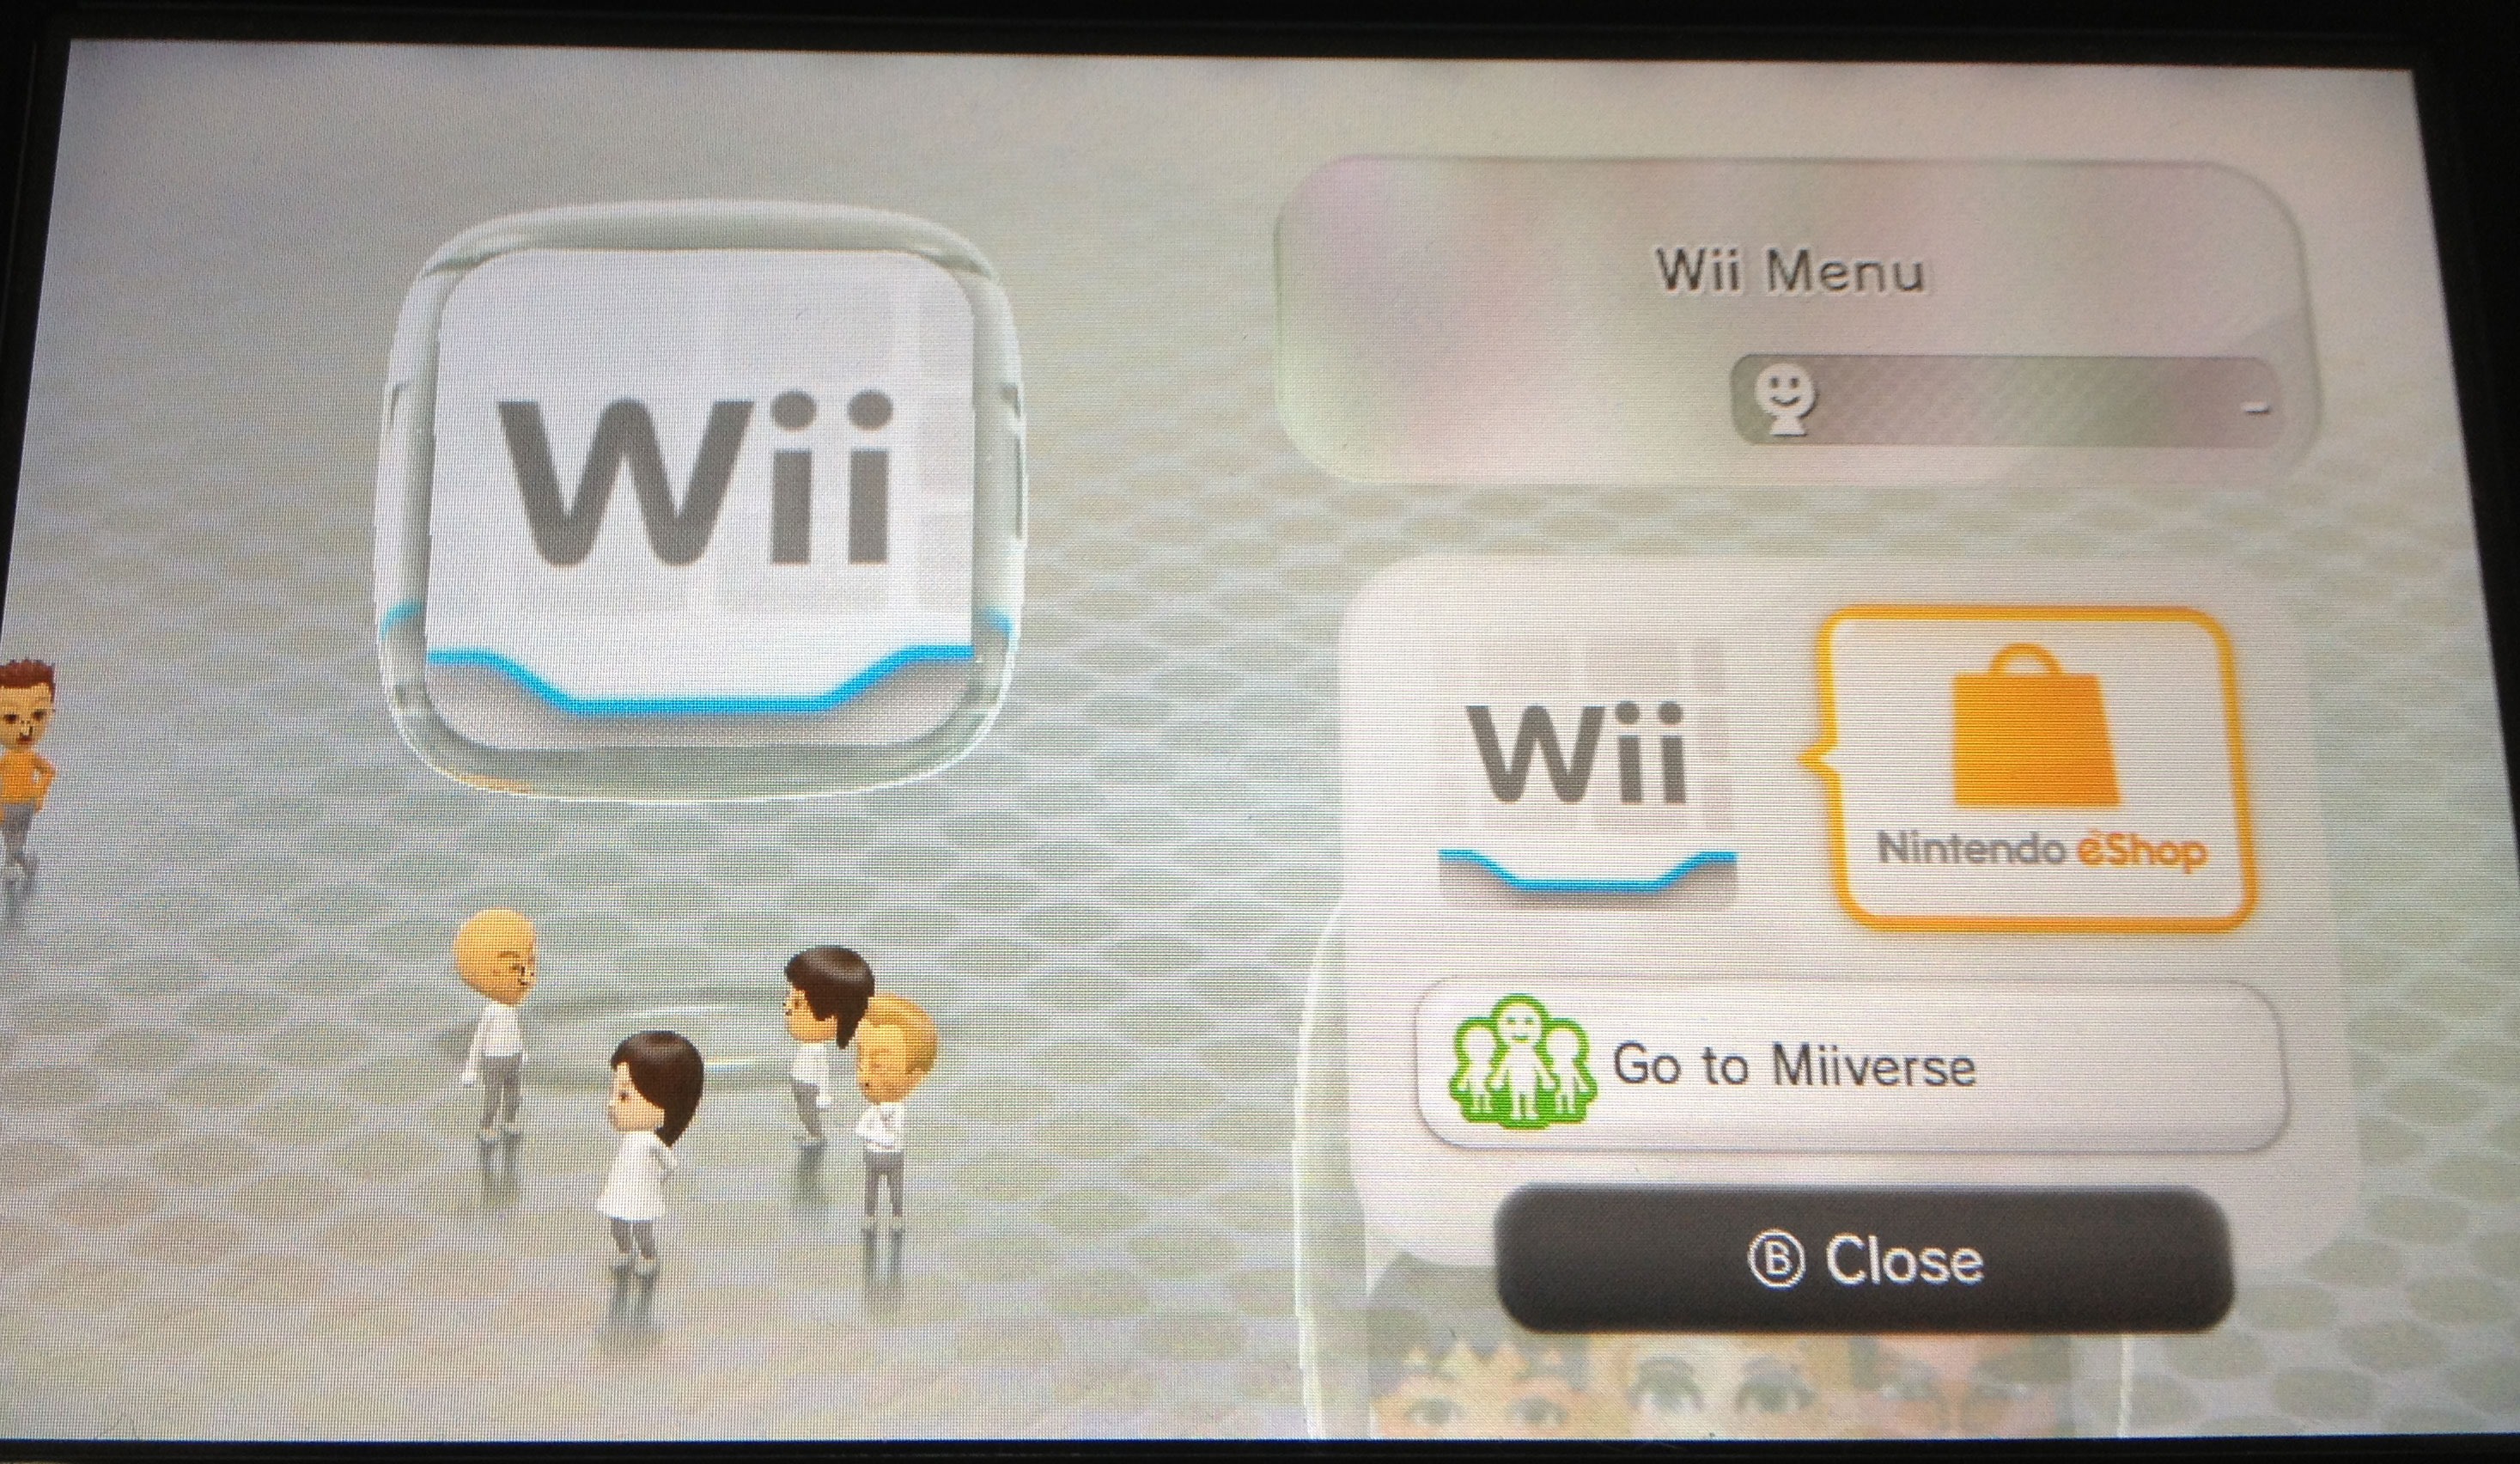 Whirlpool Lucky rechtbank Wii U Backwards Compatibility Is Like A Wii In Your Wii U - Siliconera